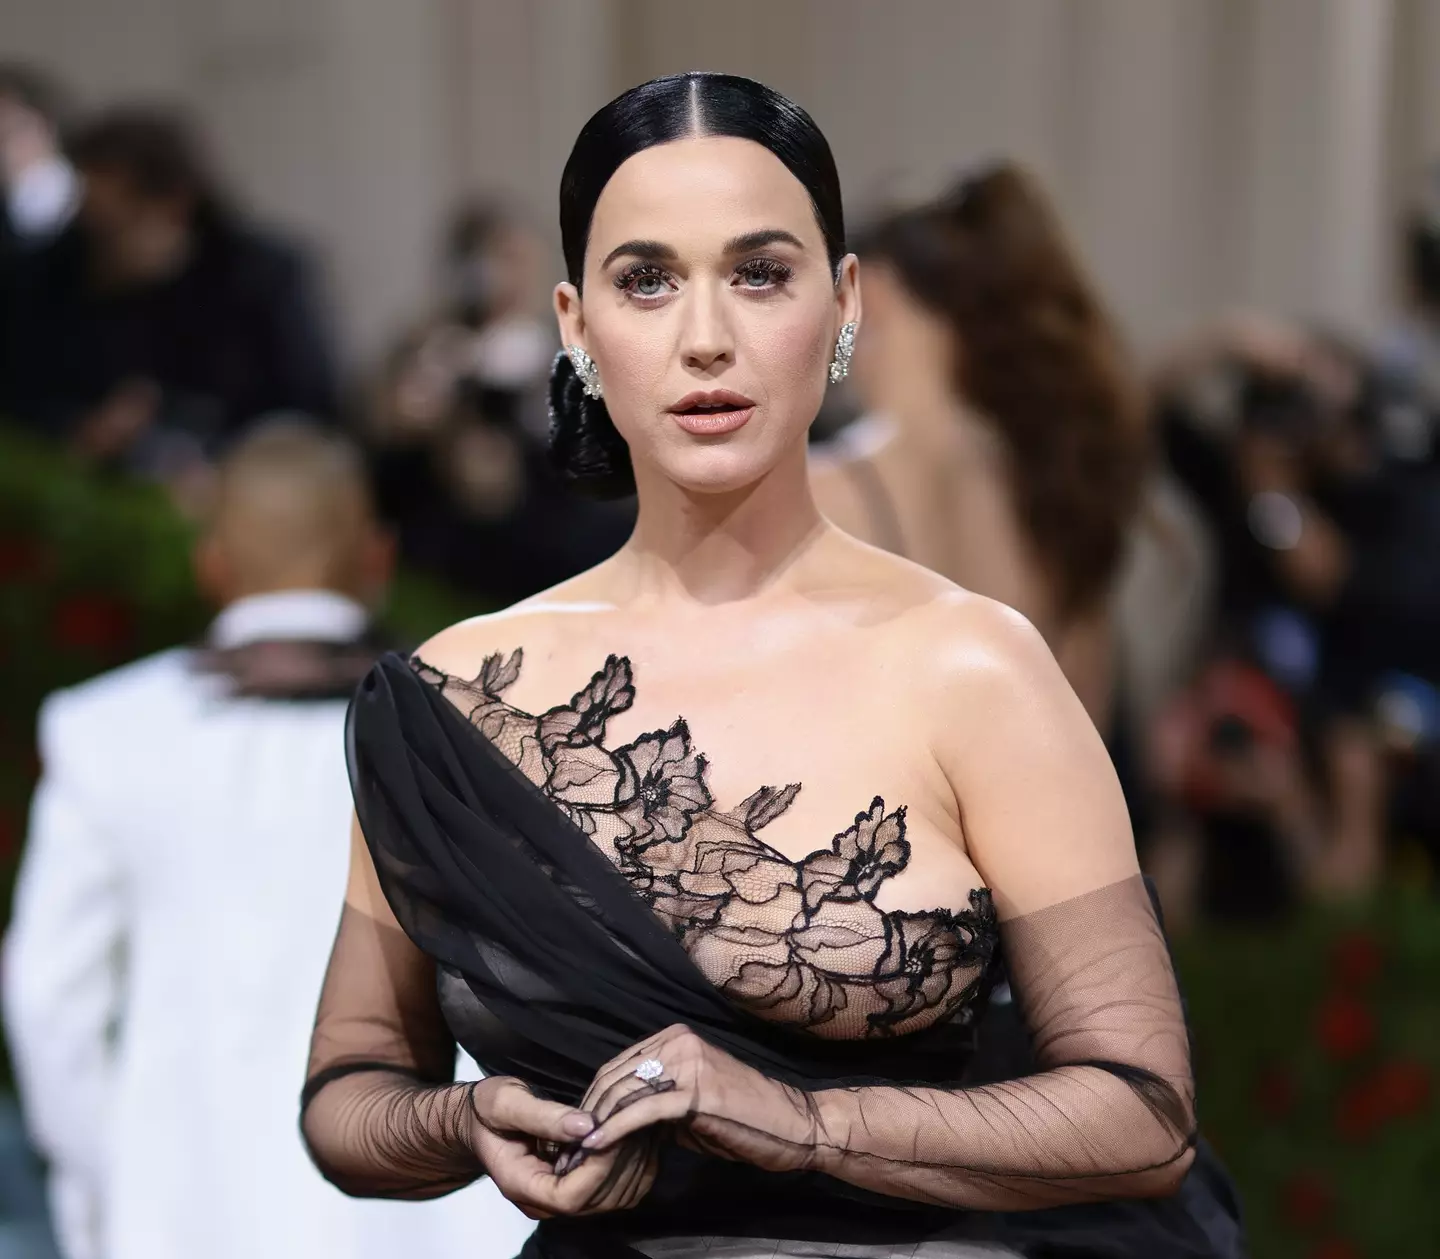 Perry at the 2022 Met Gala. (Dimitrios Kambouris/Getty Images for The Met Museum/Vogue)